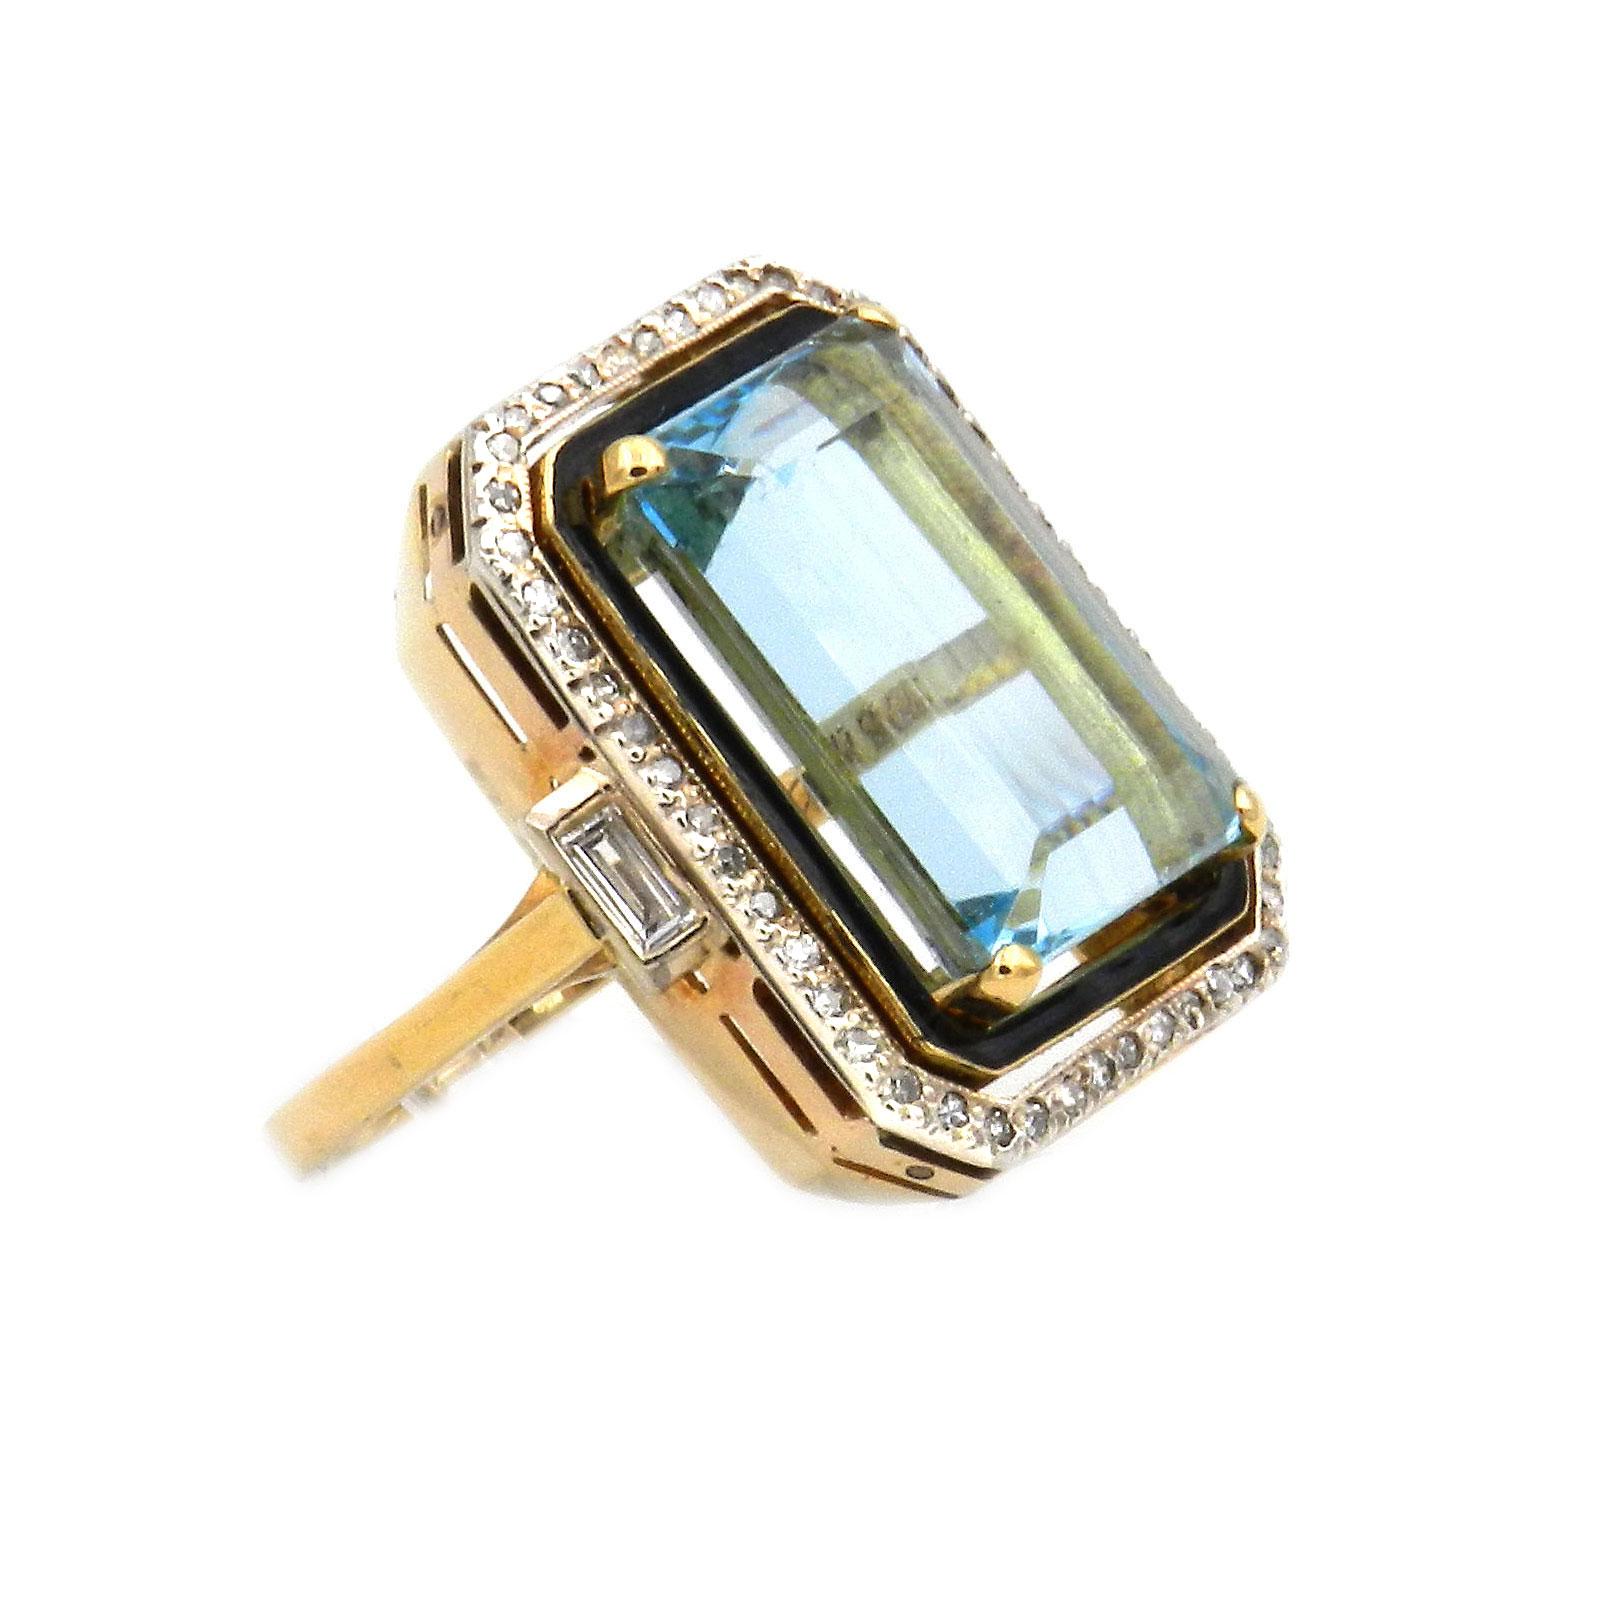 Art Deco 13.6 carat Aquamarine Diamond 18K Gold and Enamel Cocktail Ring, circa 1920

Classically elegant Art Deco ring with an octagonal ring head set with an aquamarine of clear blue-sky color, 13.6 carat, surrounded by a line of black enamel and